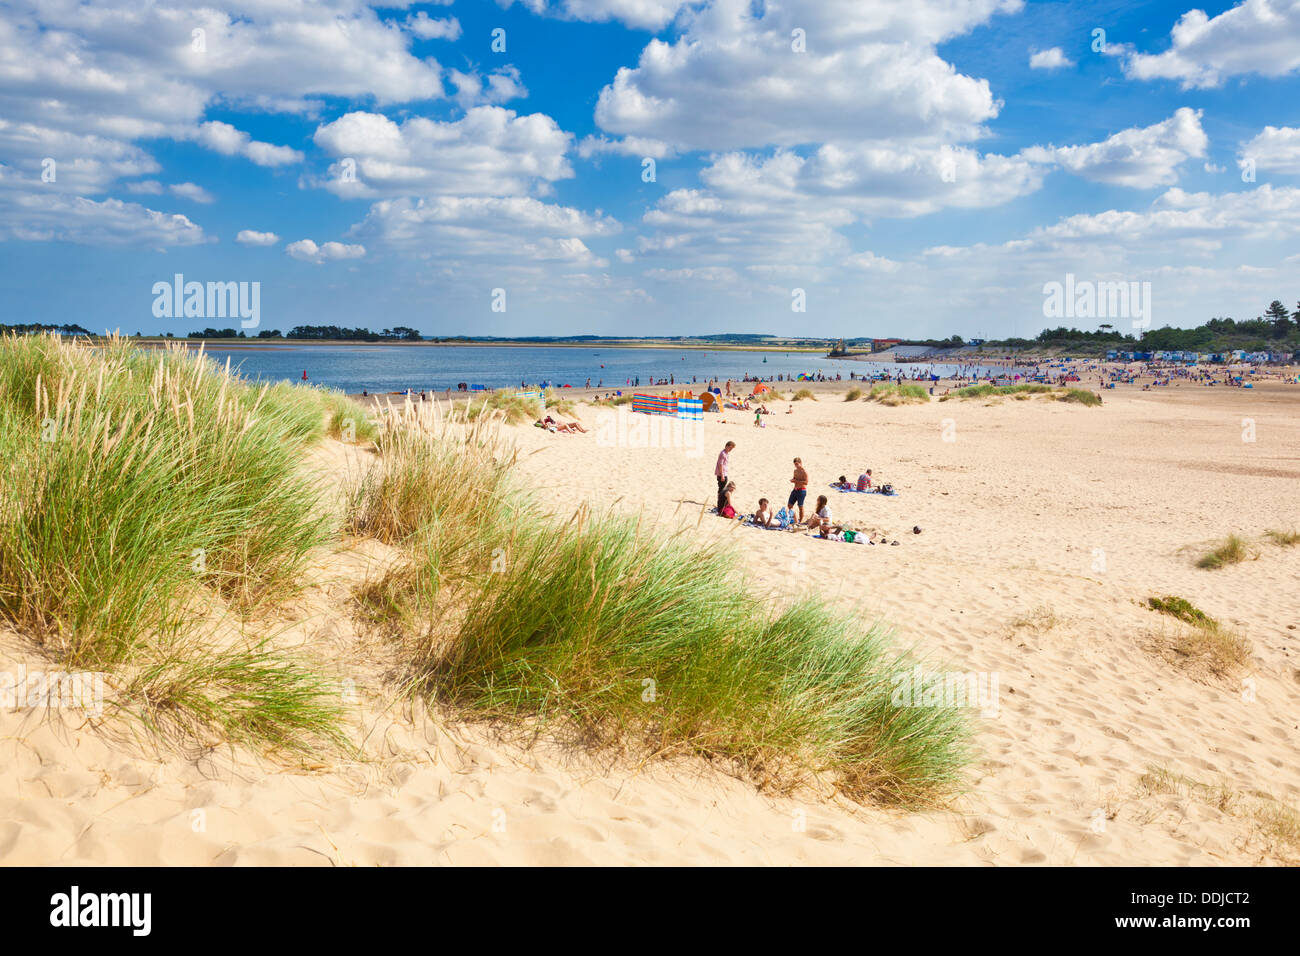 People on the beach and sand dunes at Wells next the sea North Norfolk coast England UK GB EU Europe Stock Photo